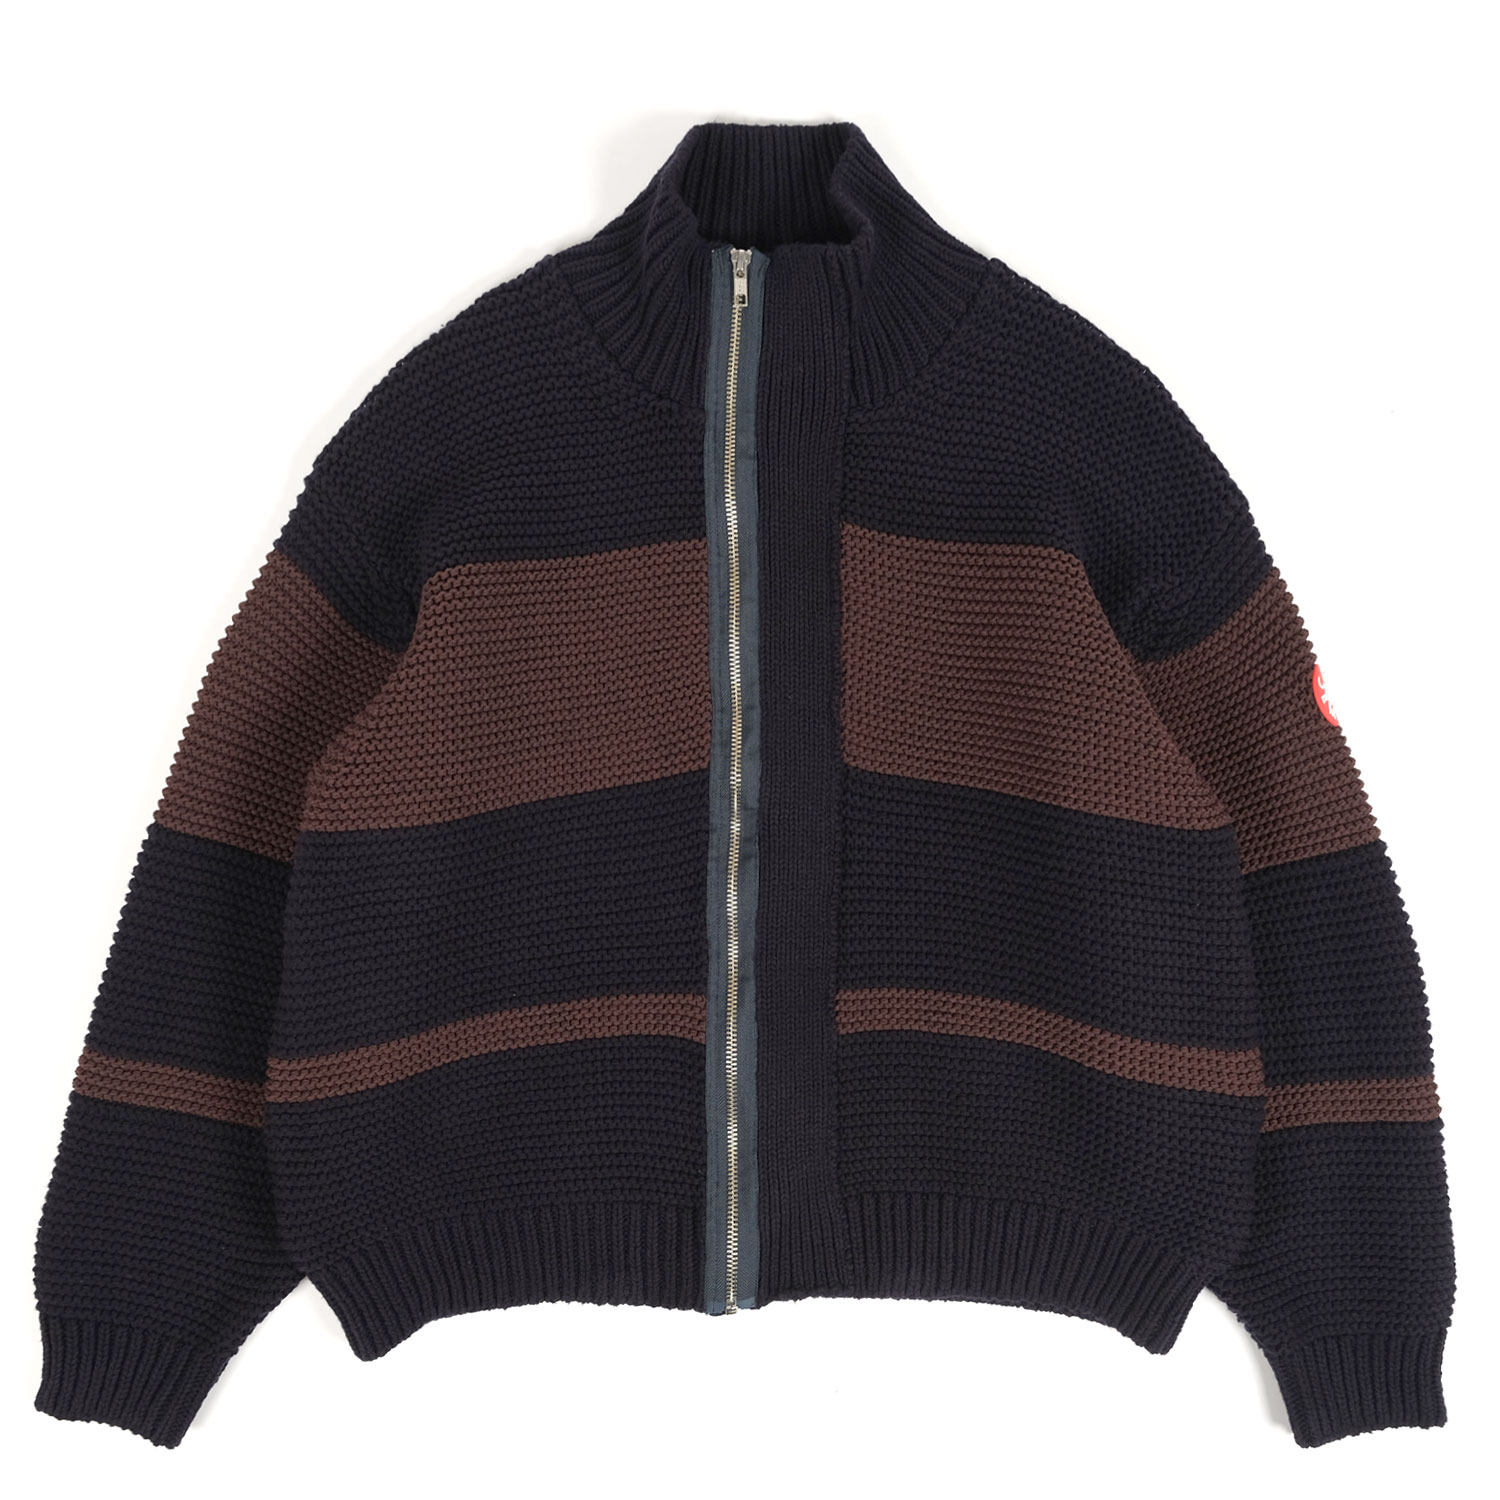 CAVEMPT 2020aw KNIT ステューシー 純正人気商品 - clinicaviterbo.com.br